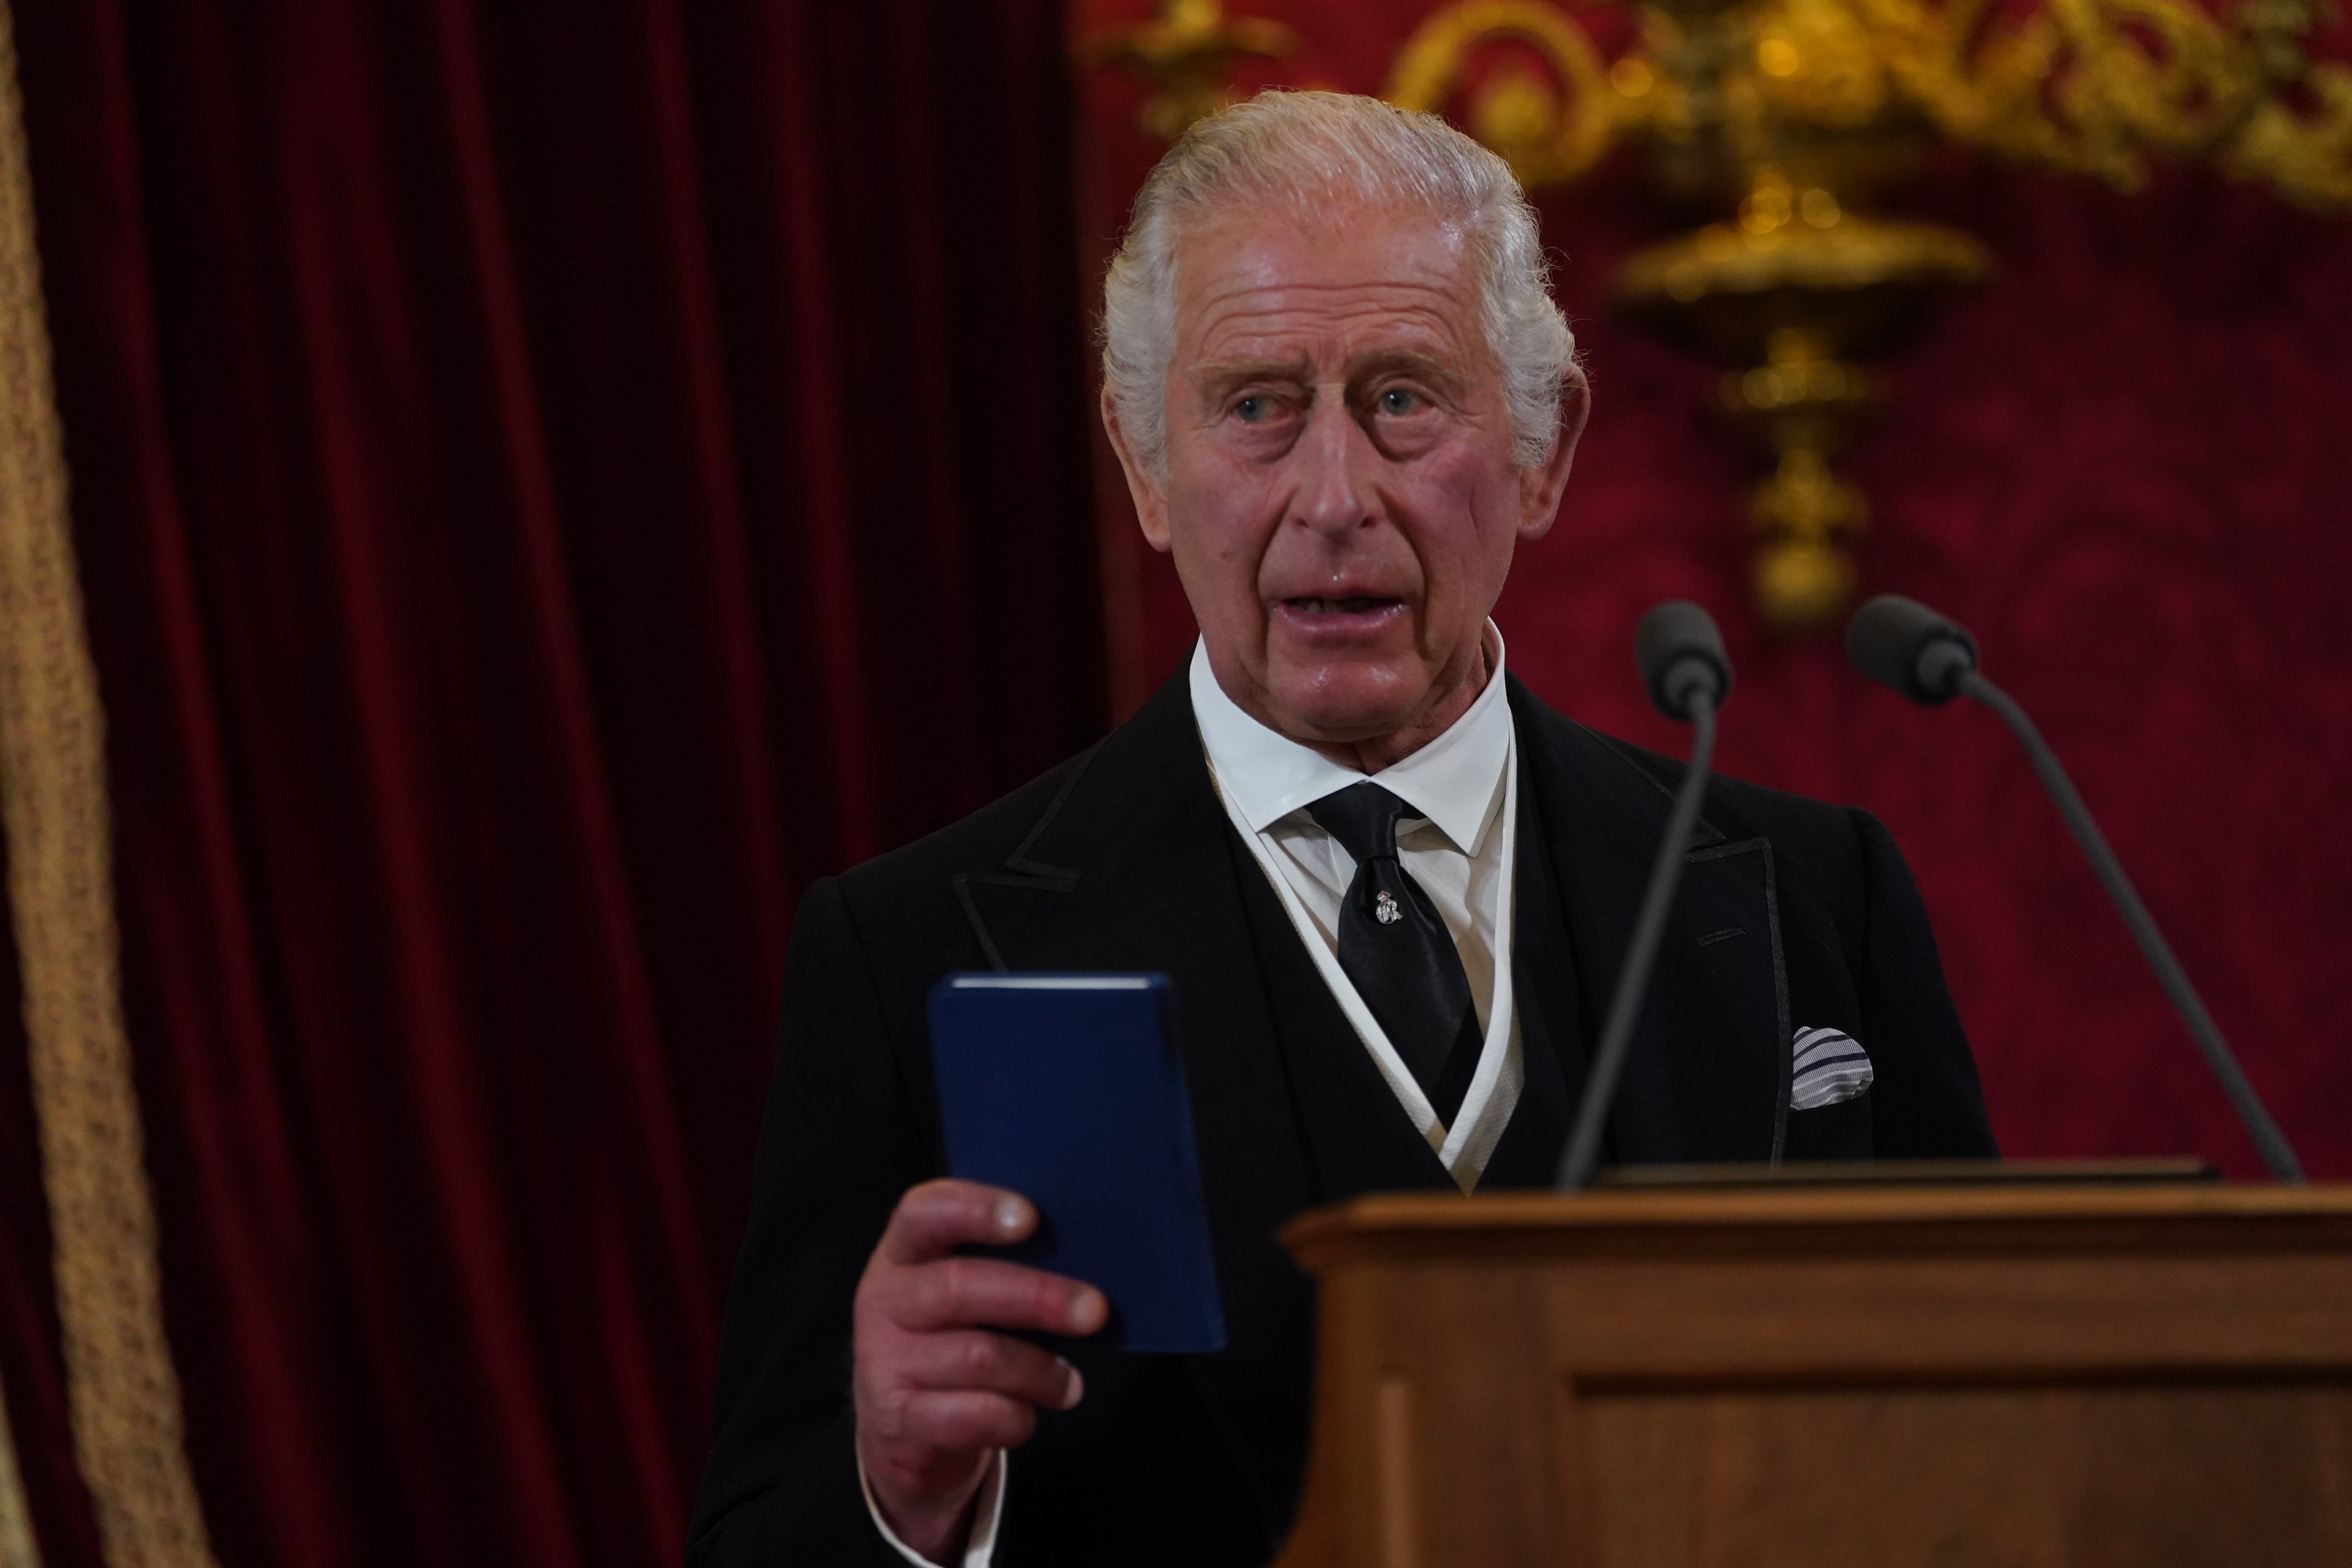 The King said he would ‘strive to follow the inspiring example I have been set’ (Jonathan Brady/PA)